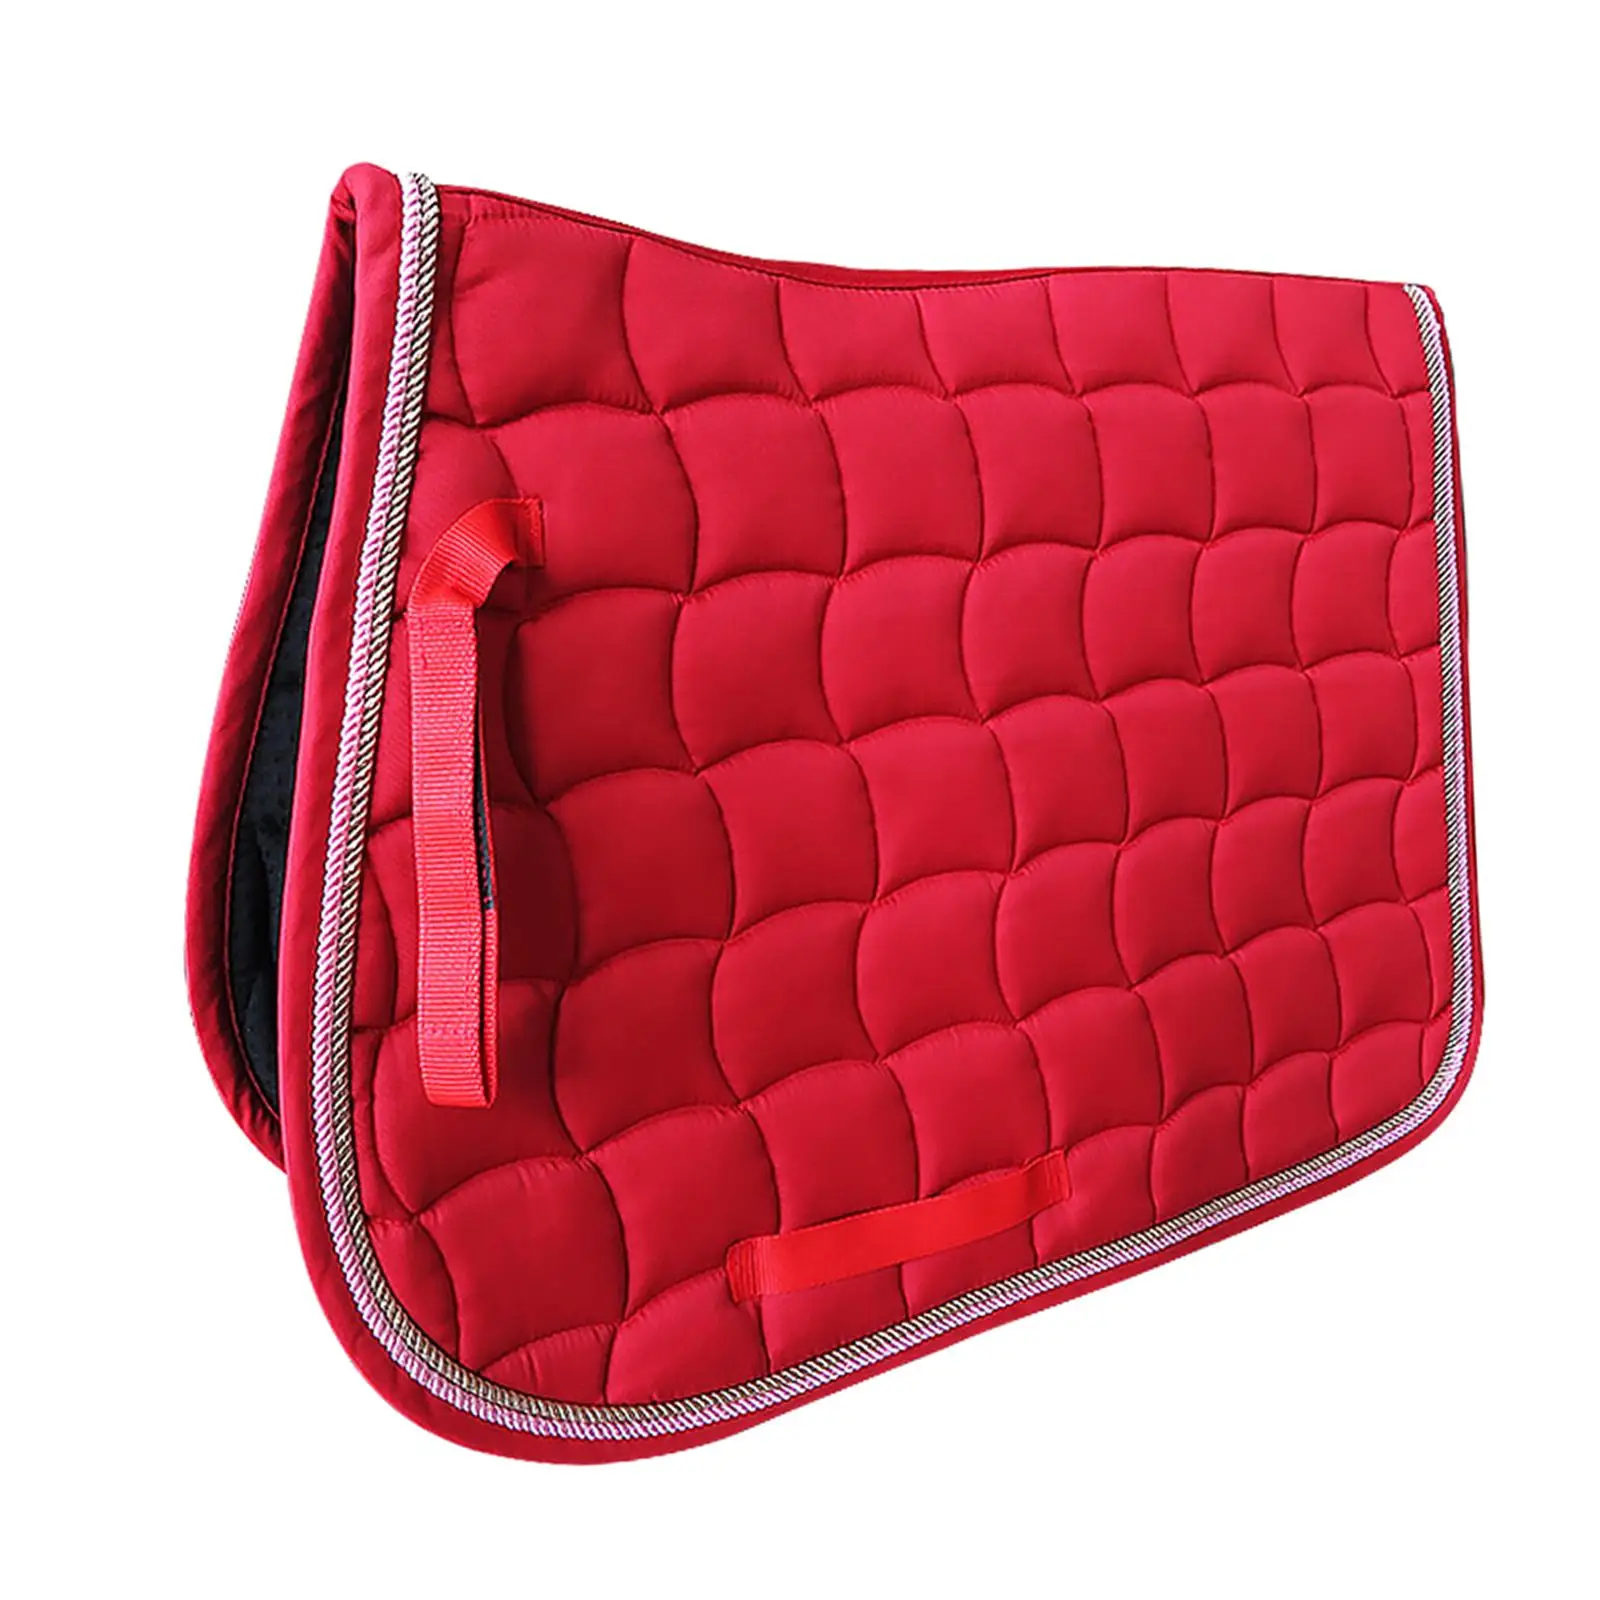 English Saddle Pad, Saddle Pads for Horses - Equestrian Gear - Diamond Quilting Sports Gear Riding Accessories